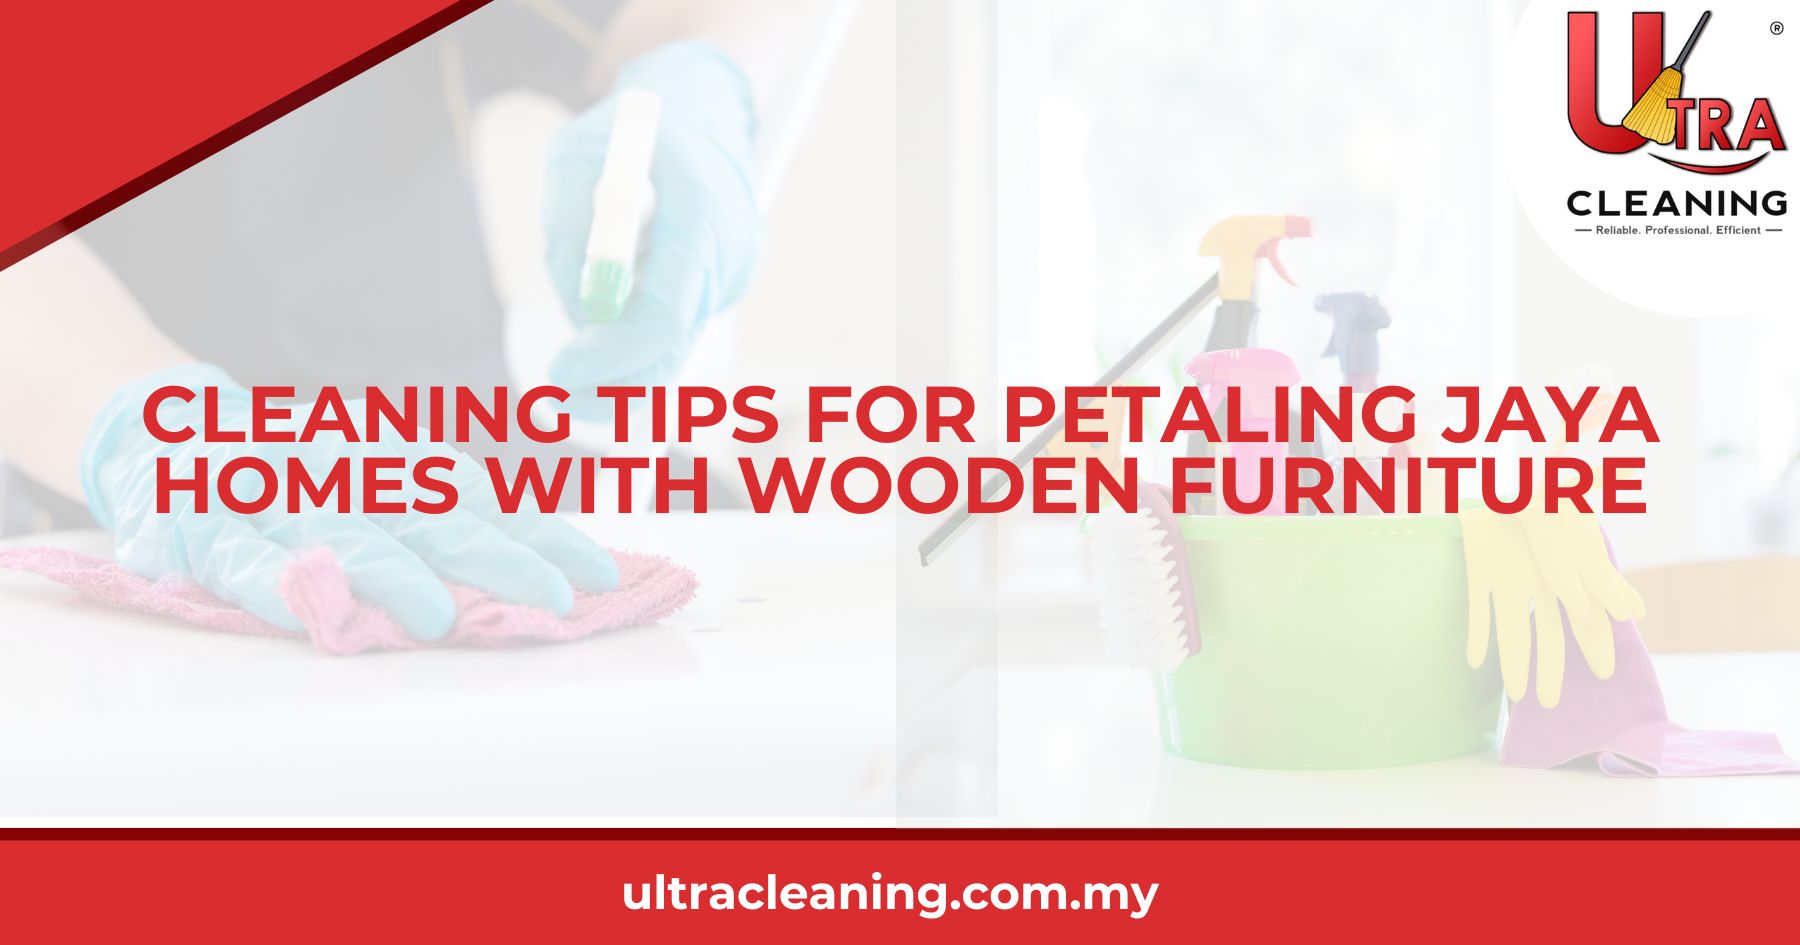 Cleaning Tips for Petaling Jaya Homes with Wooden Furniture